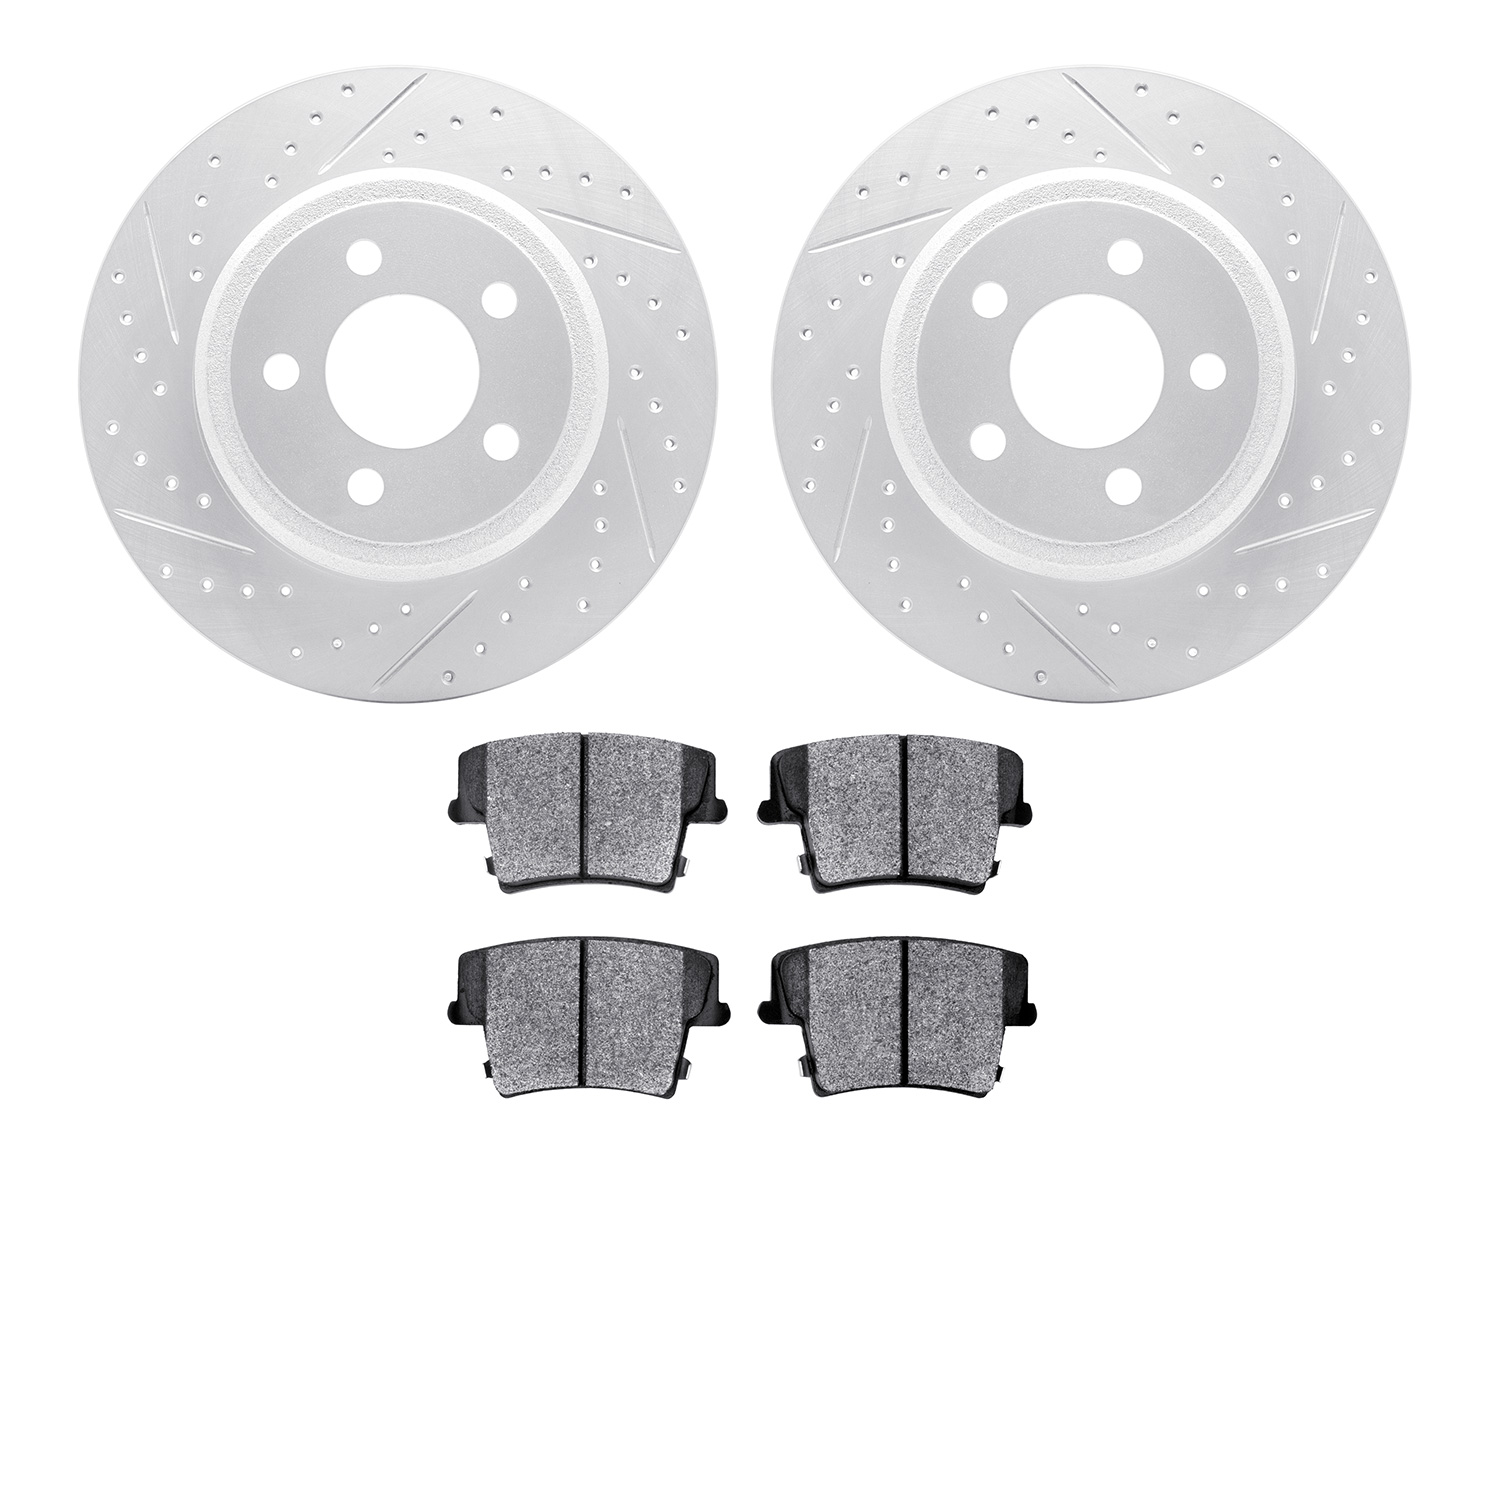 2202-39010 Geoperformance Drilled/Slotted Rotors w/Heavy-Duty Pads Kit, Fits Select Mopar, Position: Rear